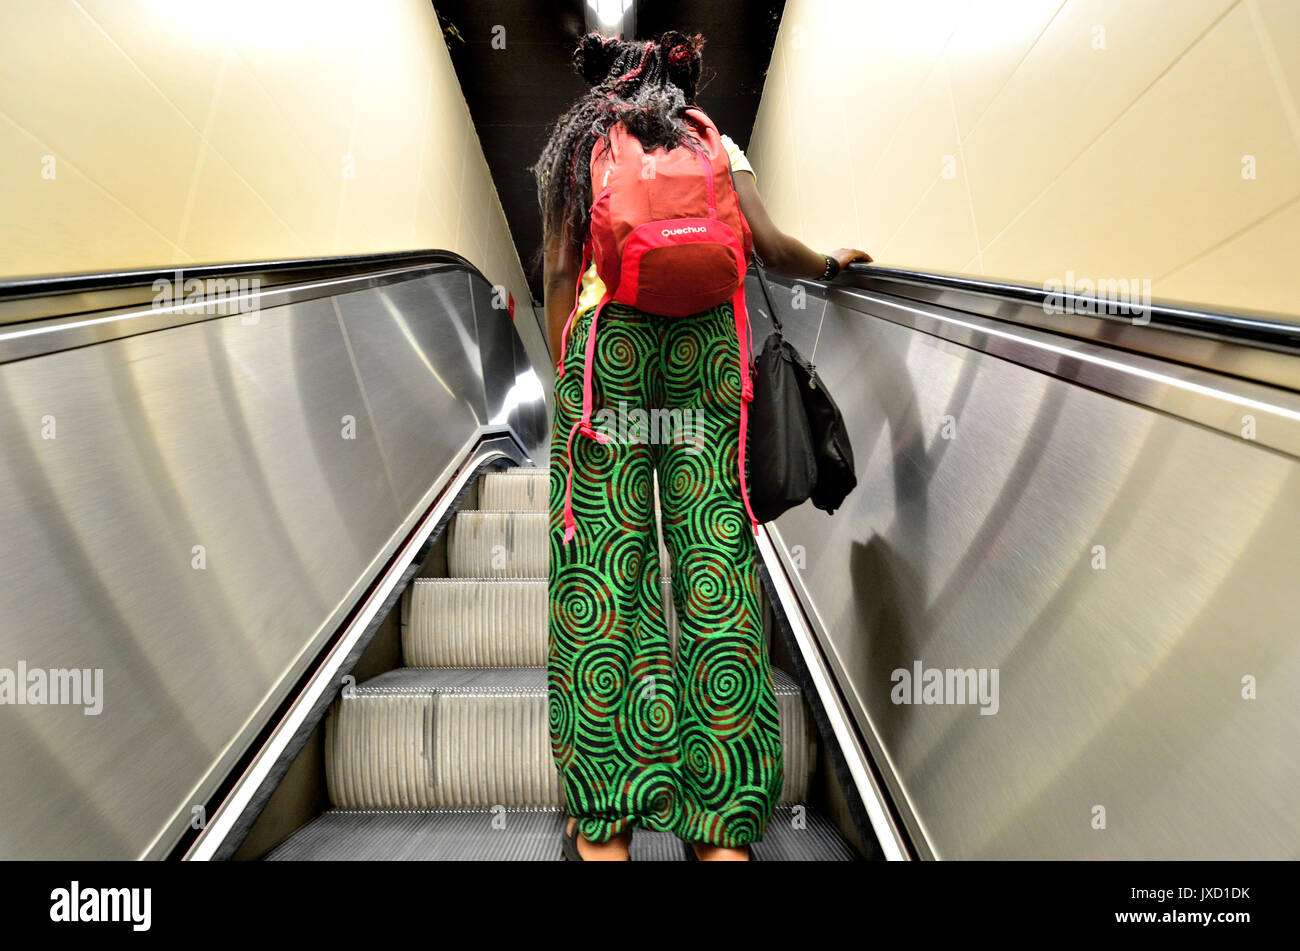 Brussels, Belgium. Woman with green trousers on an escalator in the metro Stock Photo